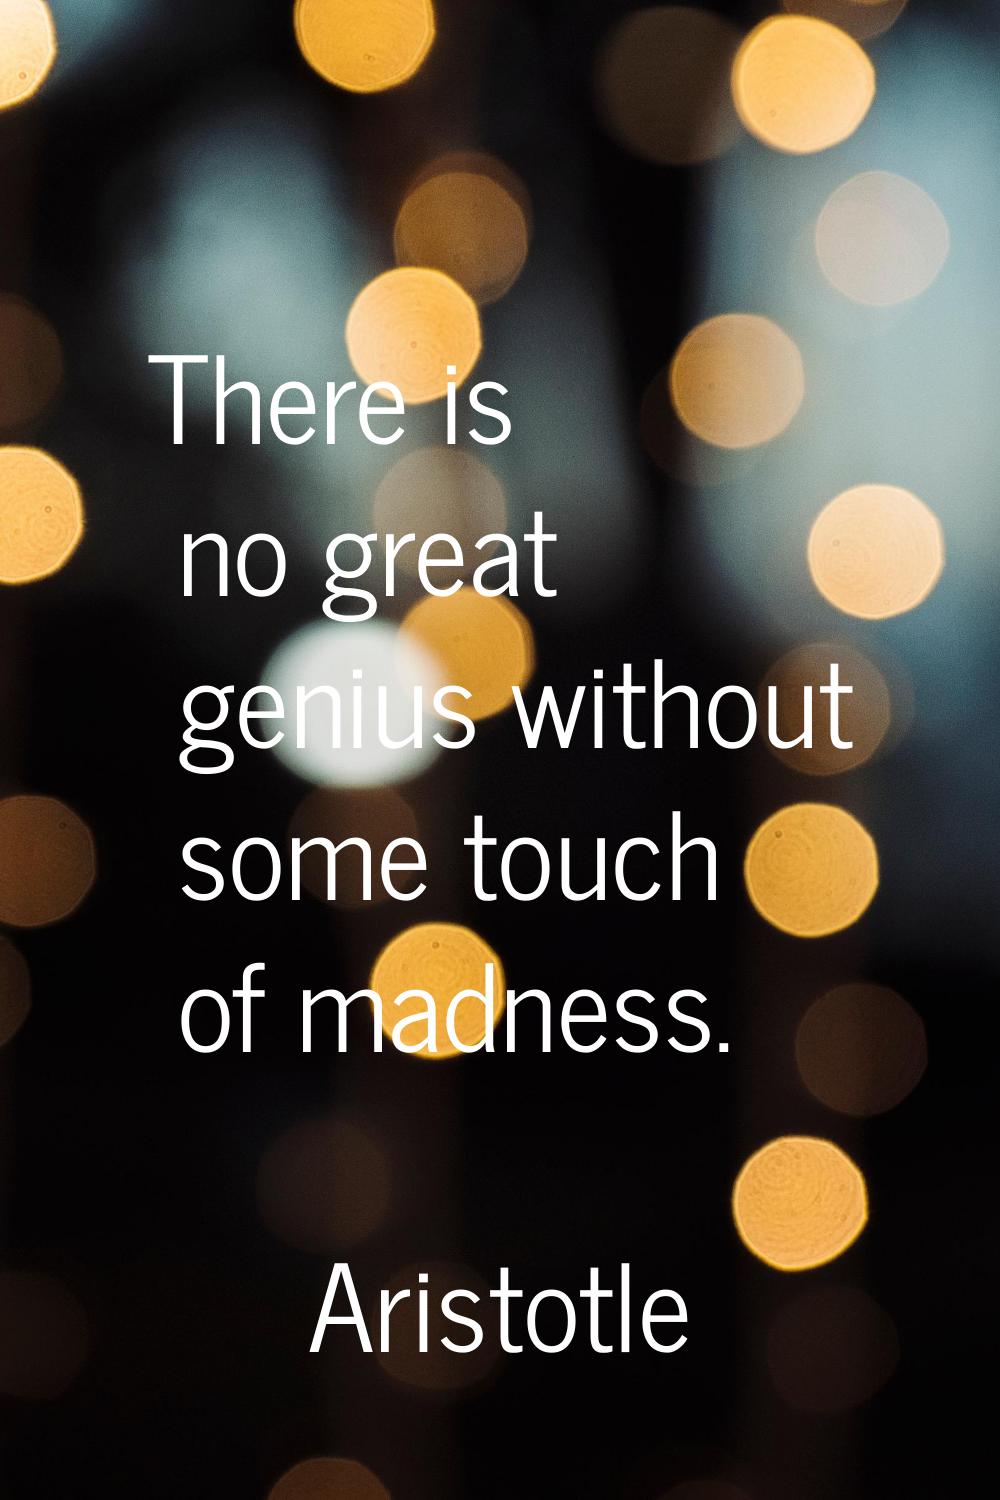 There is no great genius without some touch of madness.